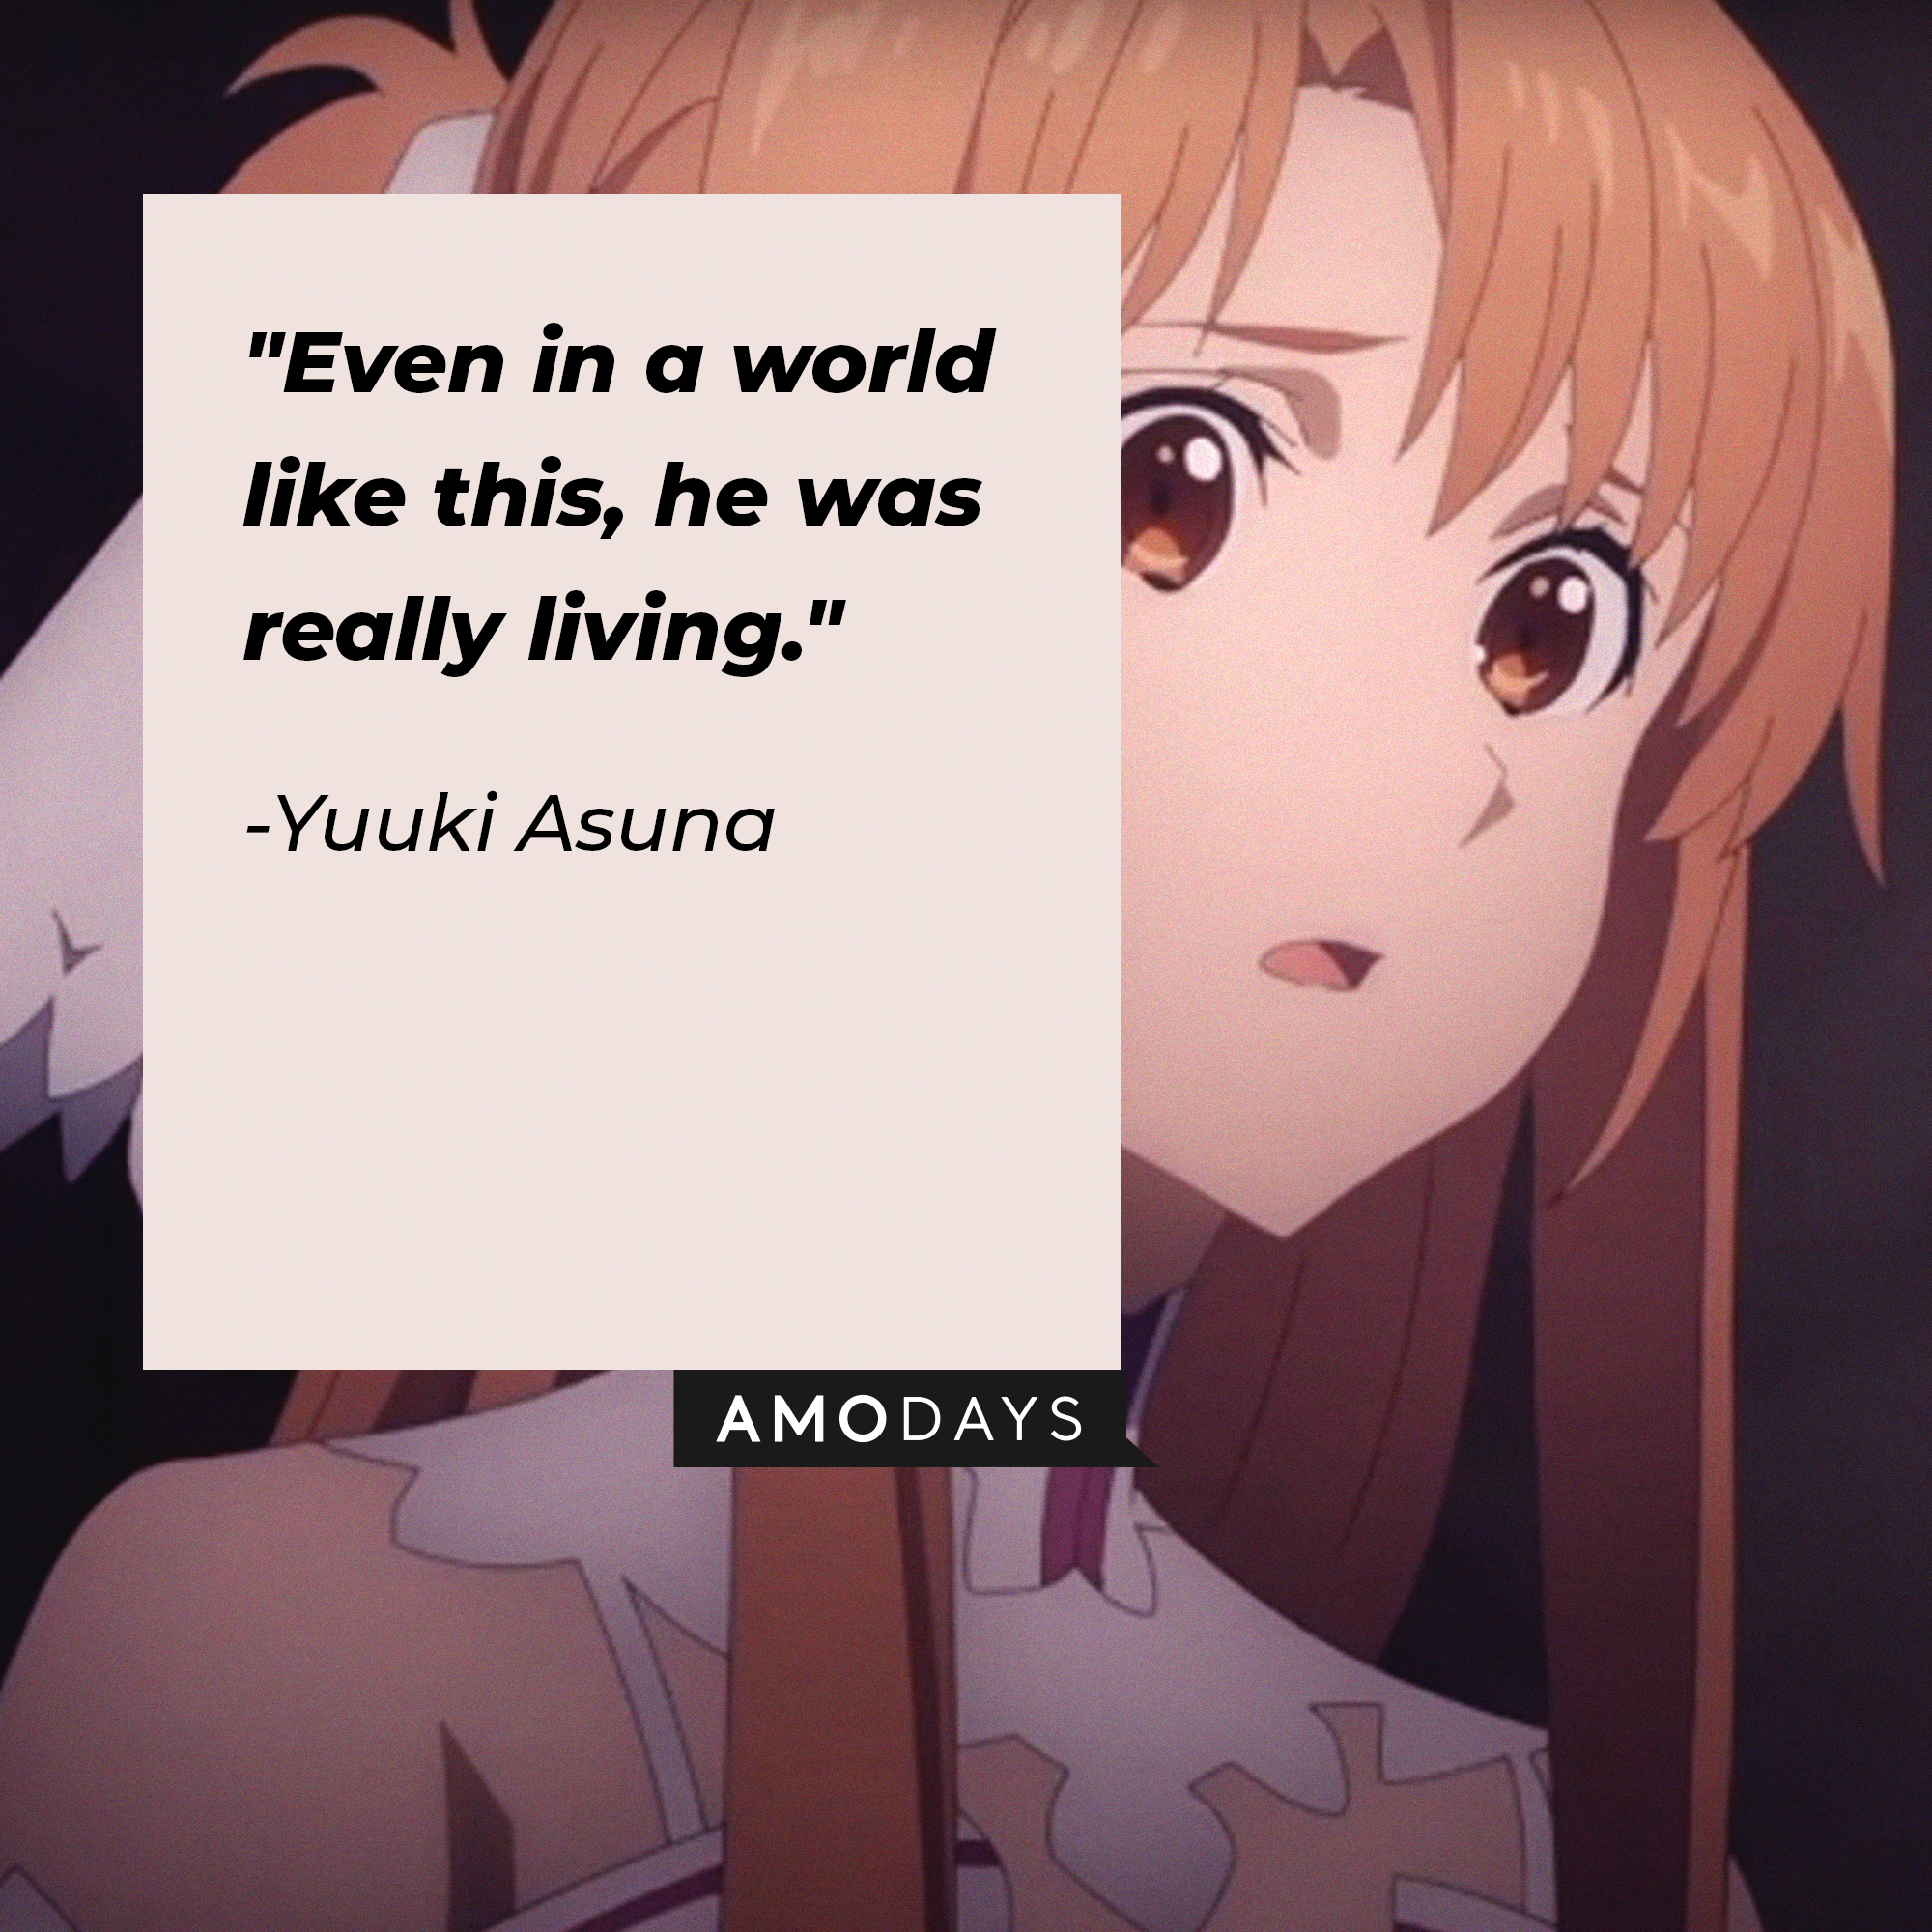 Yuuki Asuna's quote: "Even in a world like this, he was really living." | Source: Facebook.com/SwordArtOnlineUSA